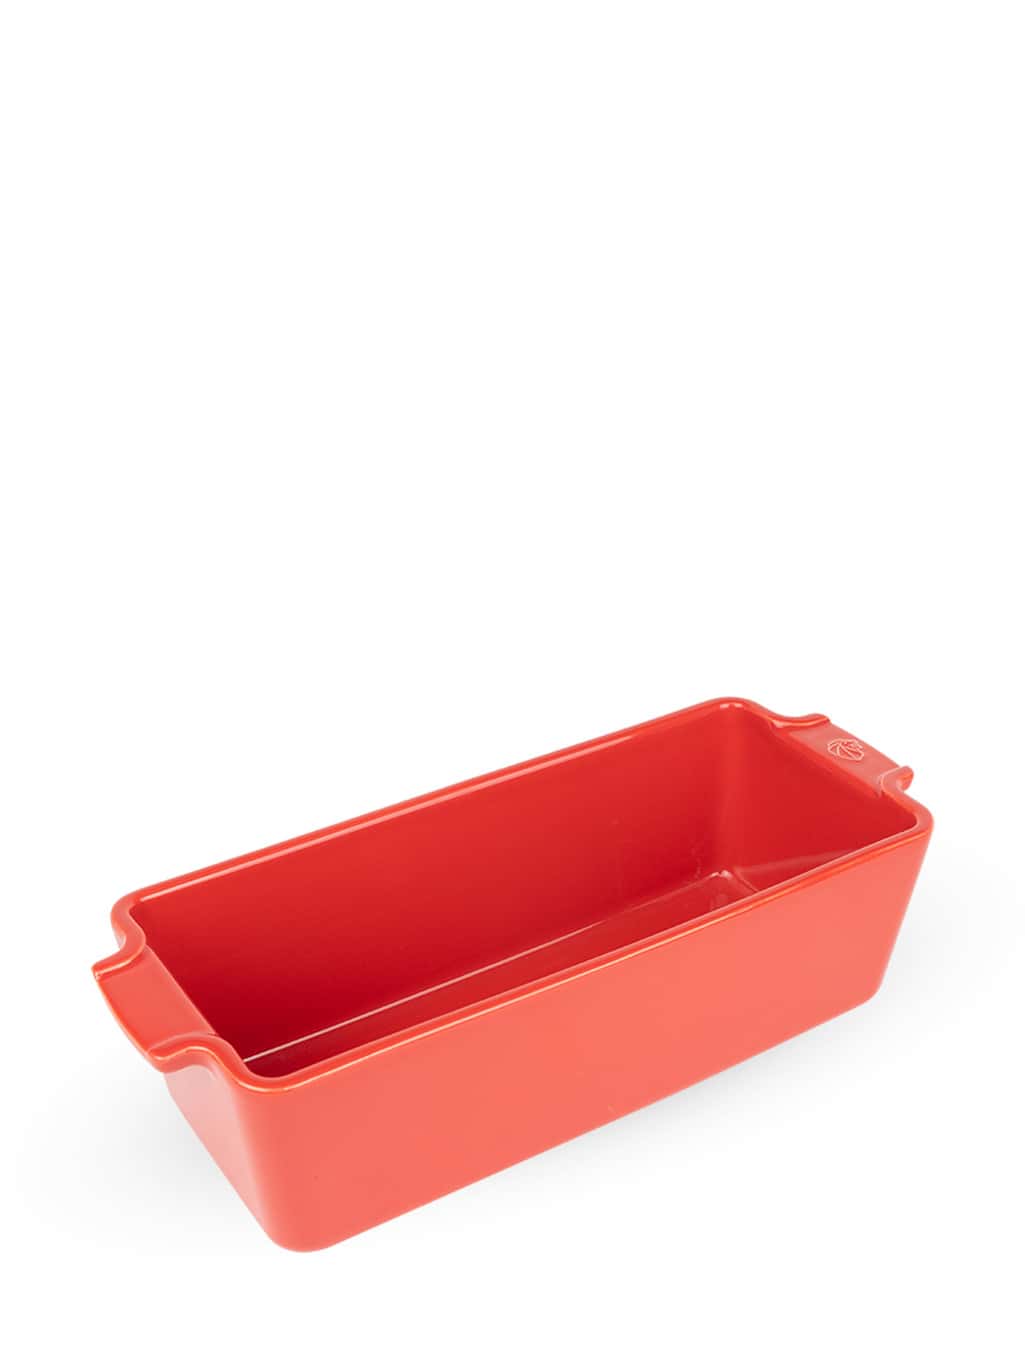 Photos - Bakeware Appolia Red Loaf Baking Dish, 31cm 